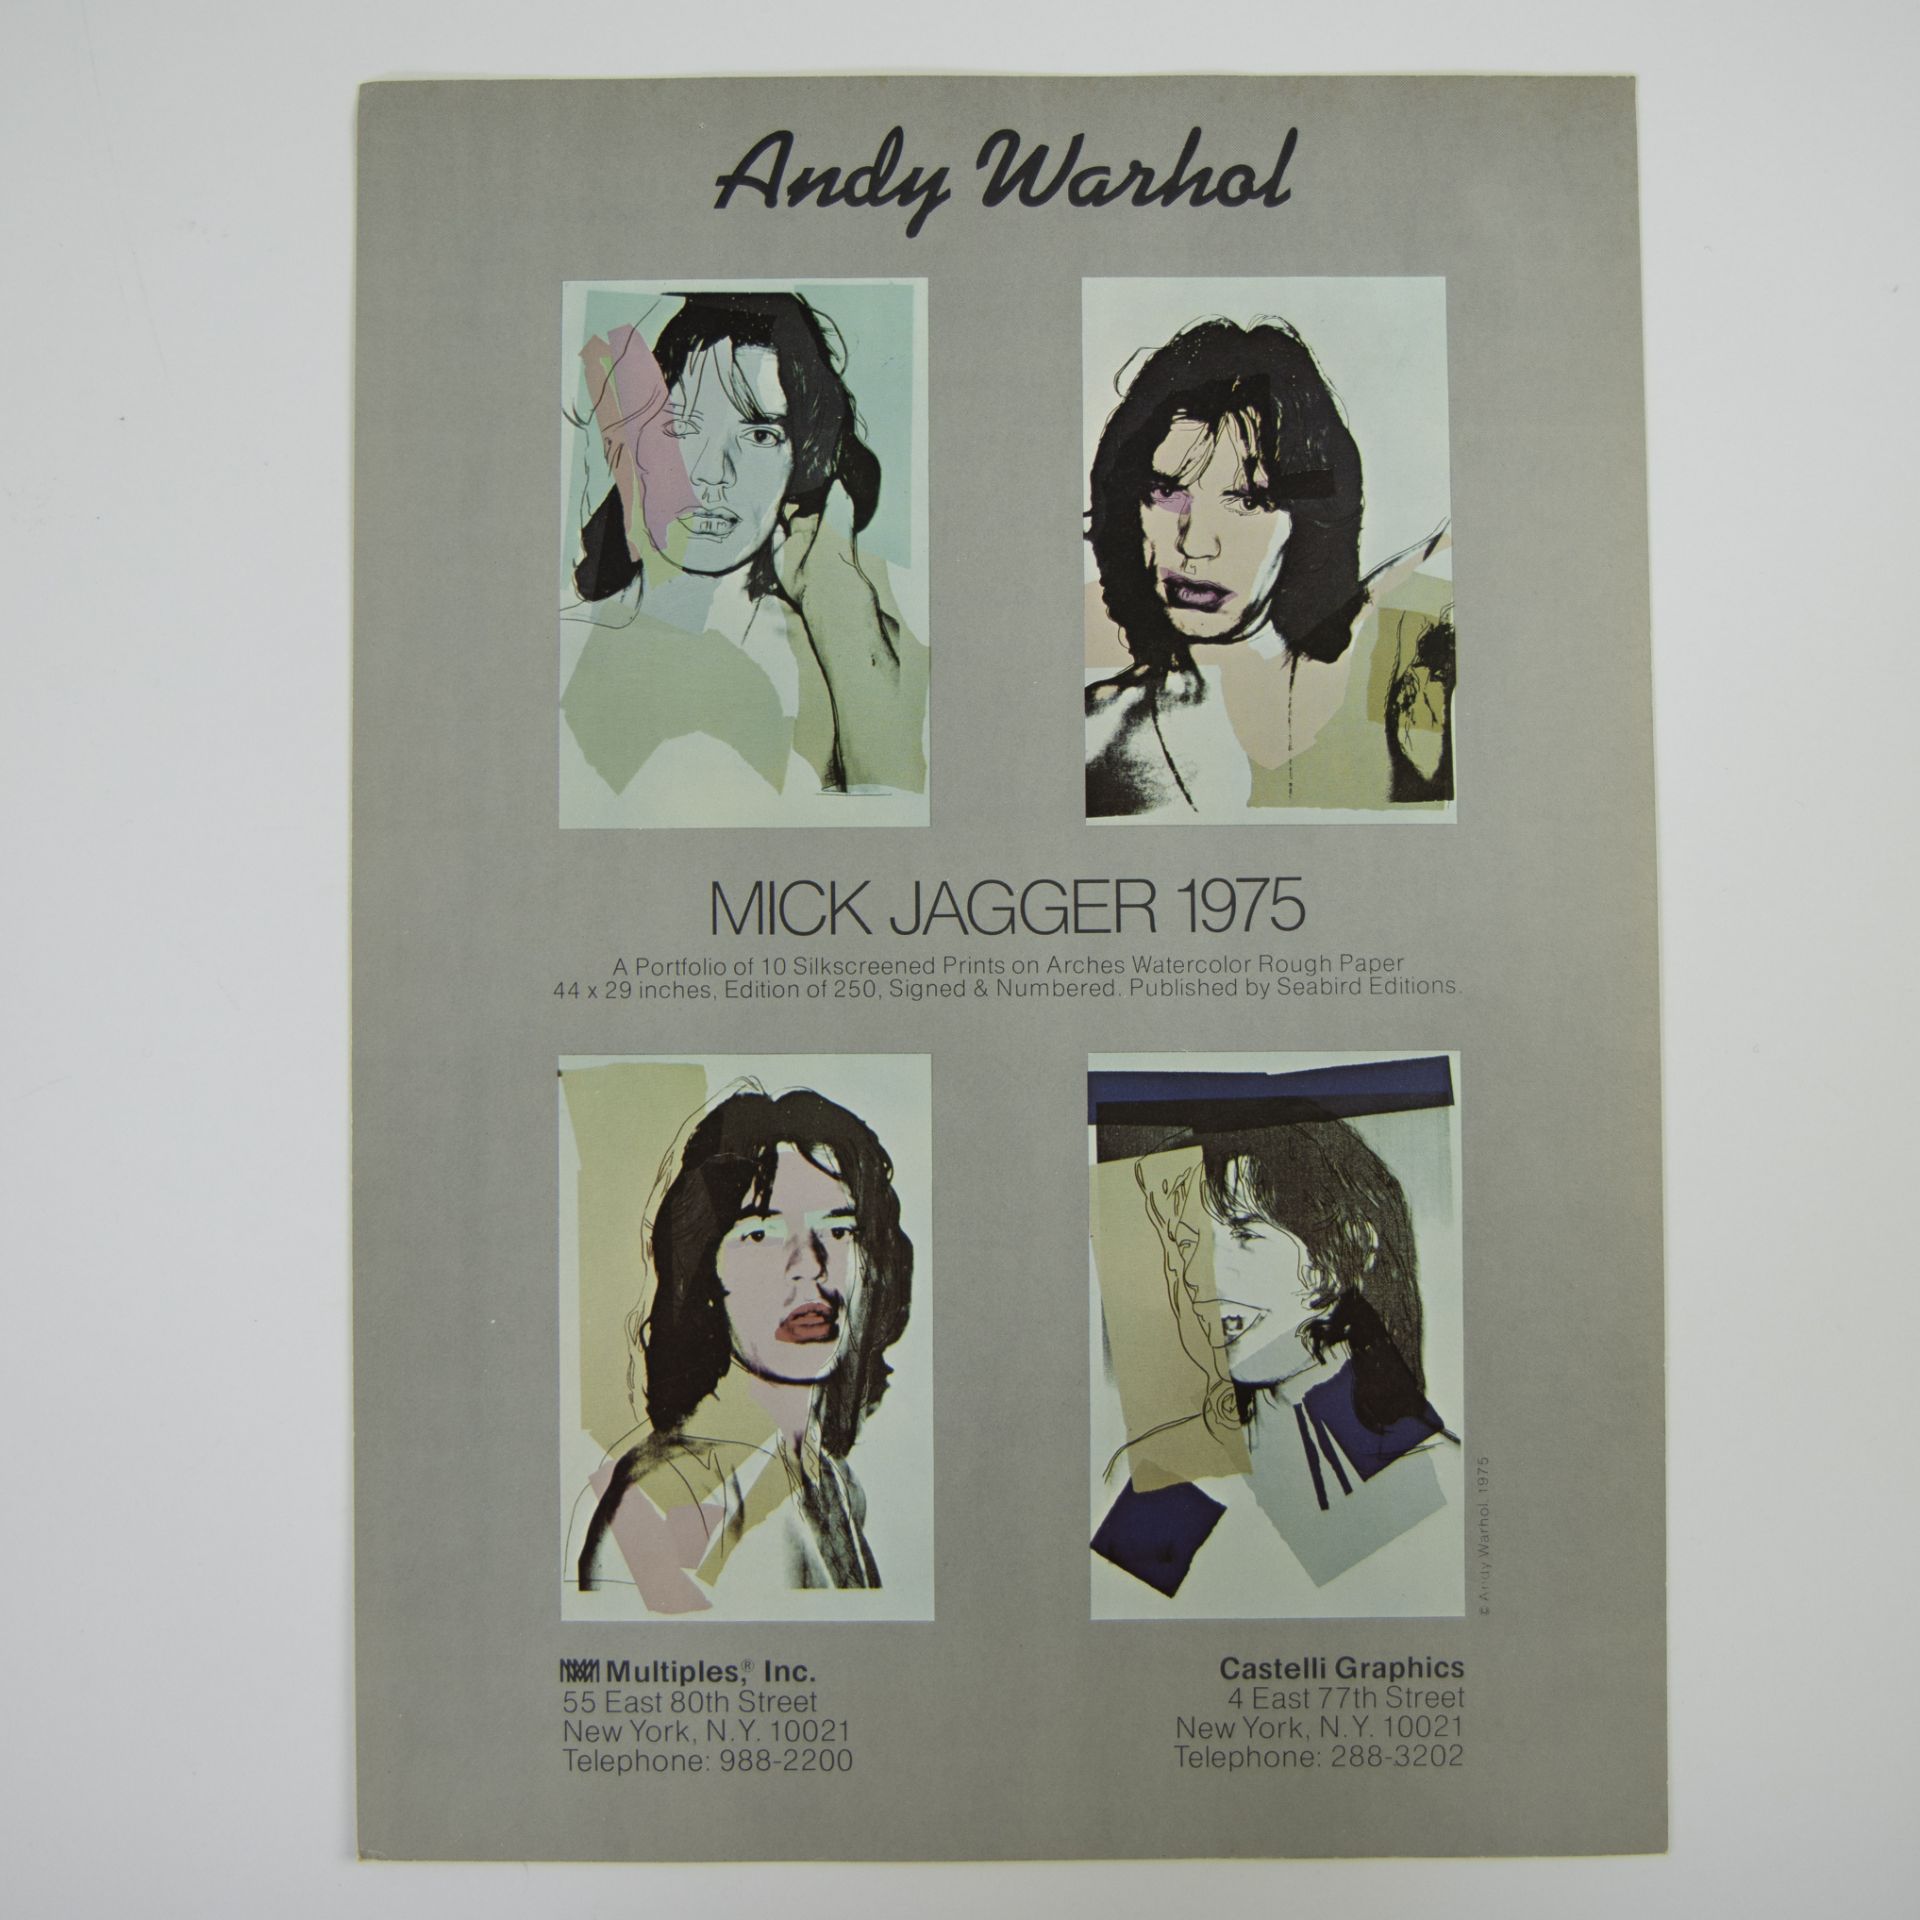 Series of ten colour screen prints Andy Warhol Mick Jagger on light cardboard. Ten cards and invitat - Image 5 of 8